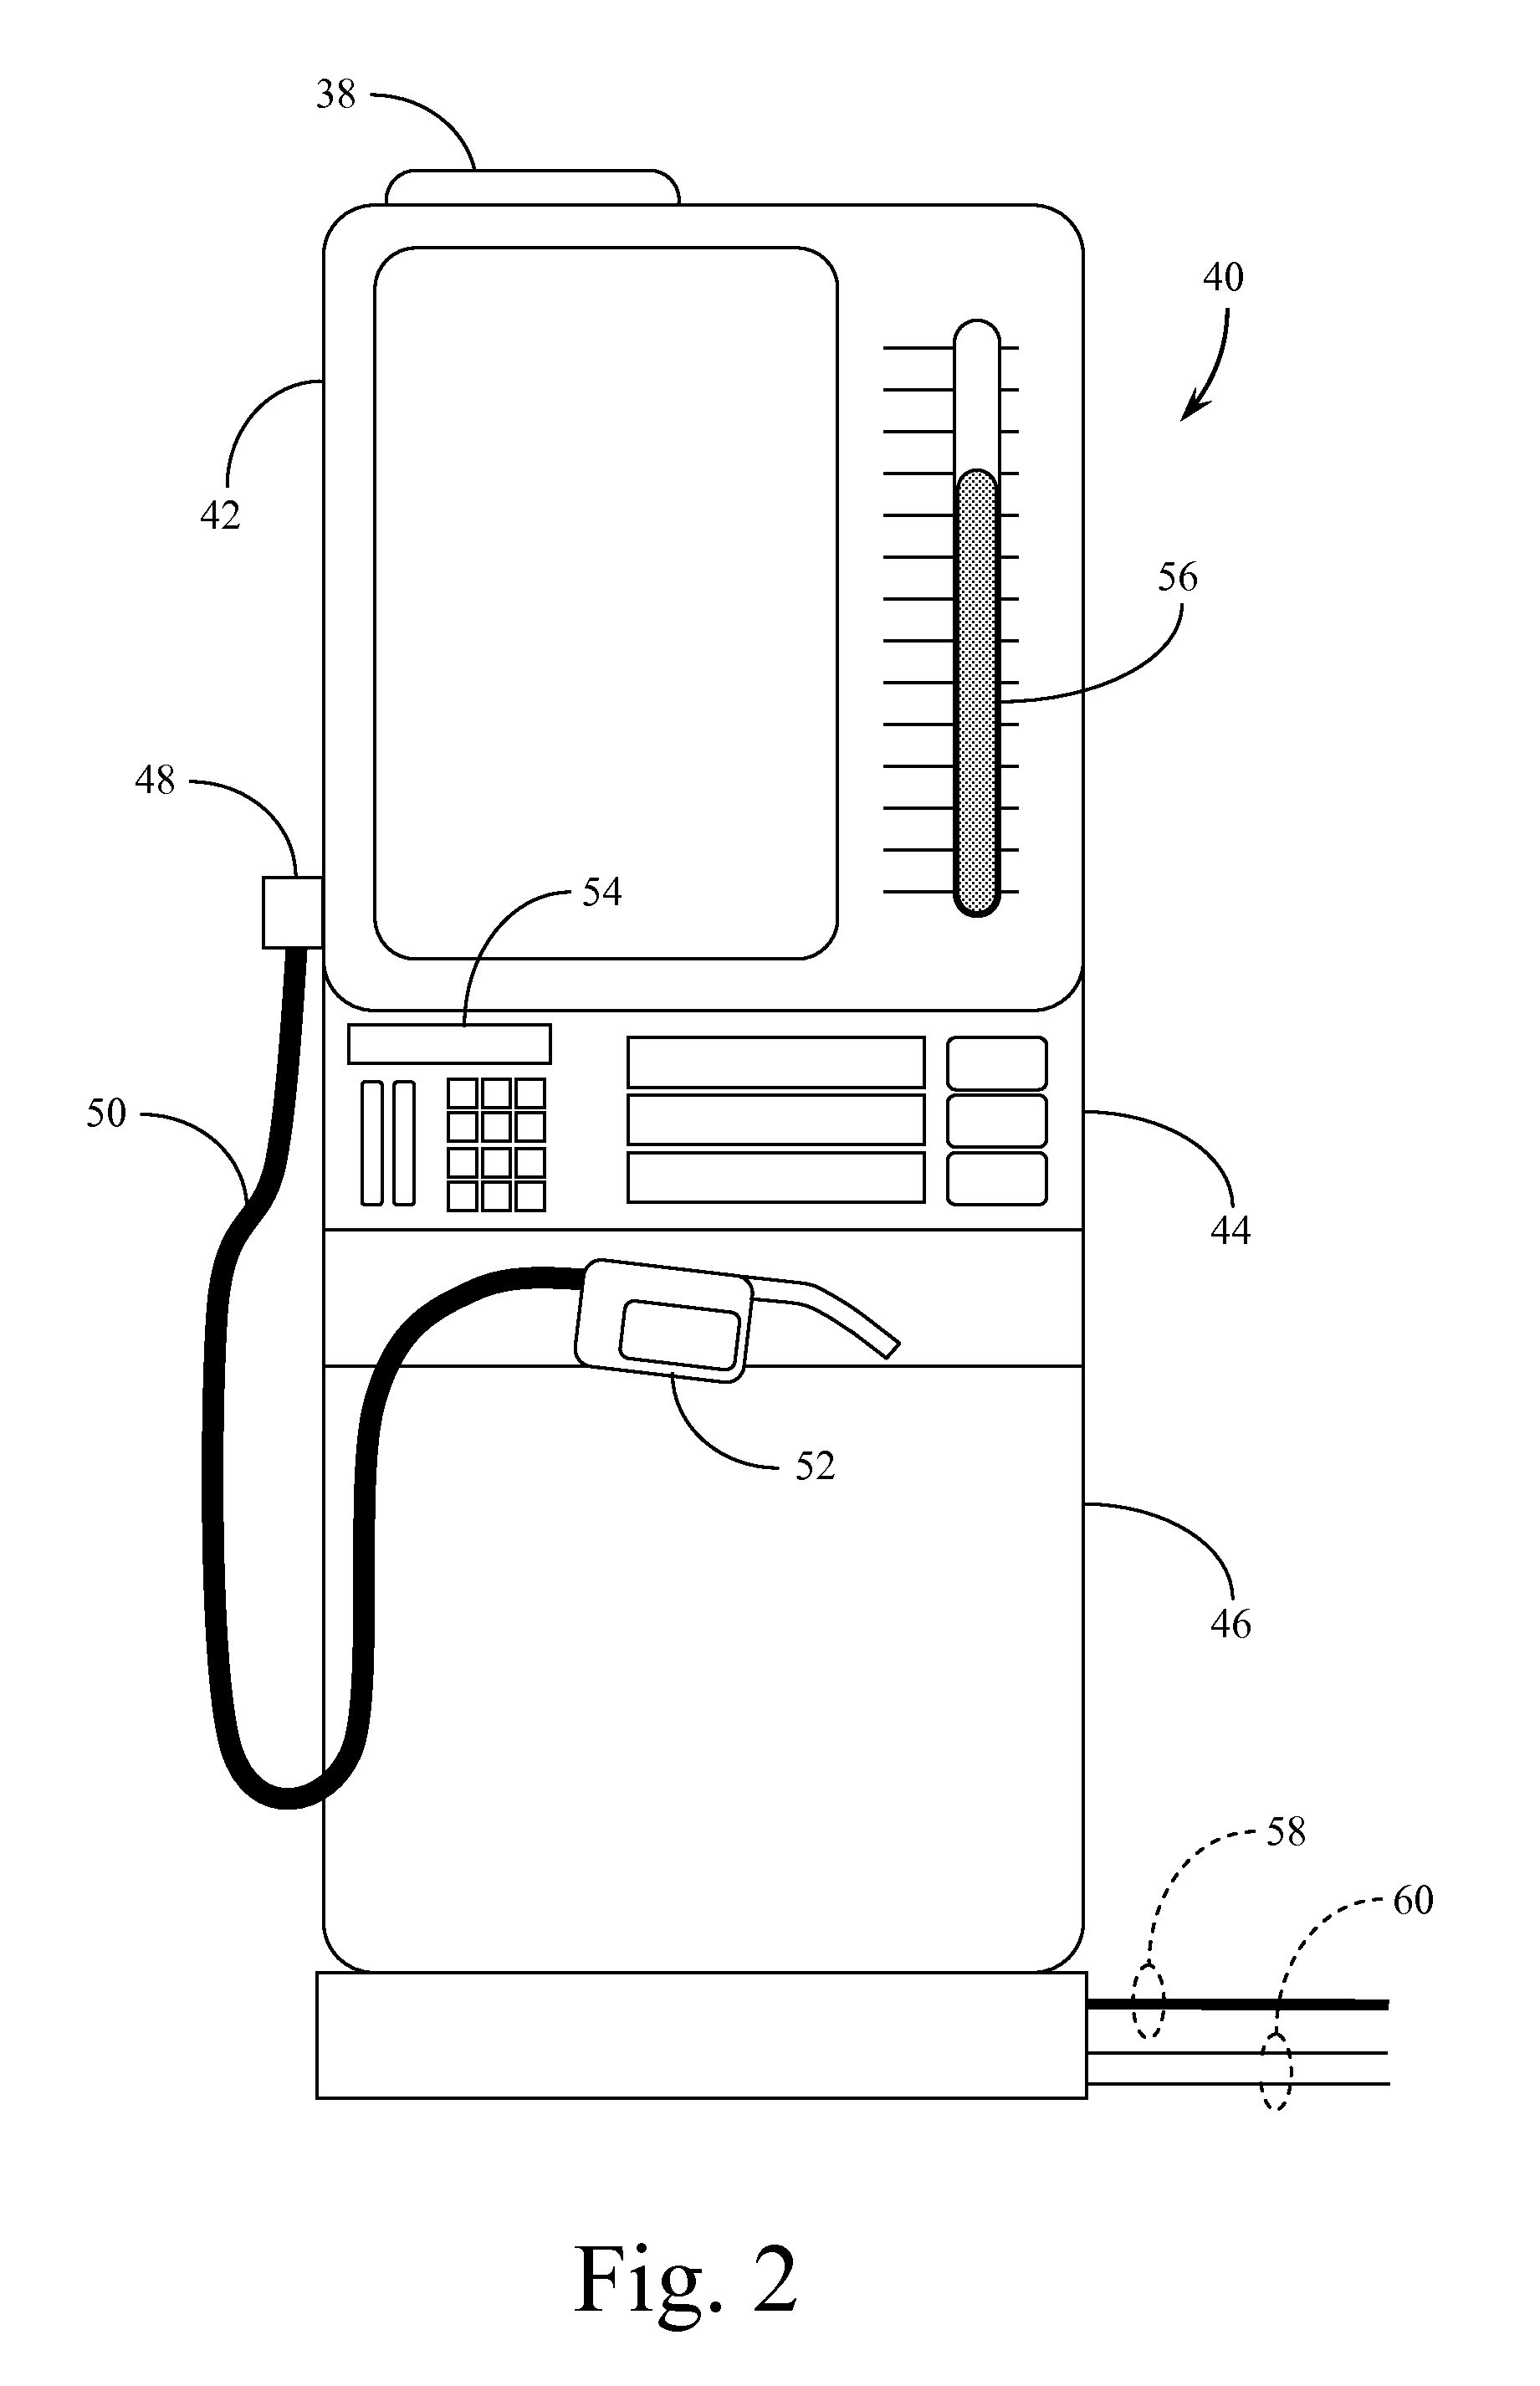 Systems and Methods for On-Site Mixing and Dispensing of a Reducing Agent Solution for Use with a Diesel Catalytic Converter